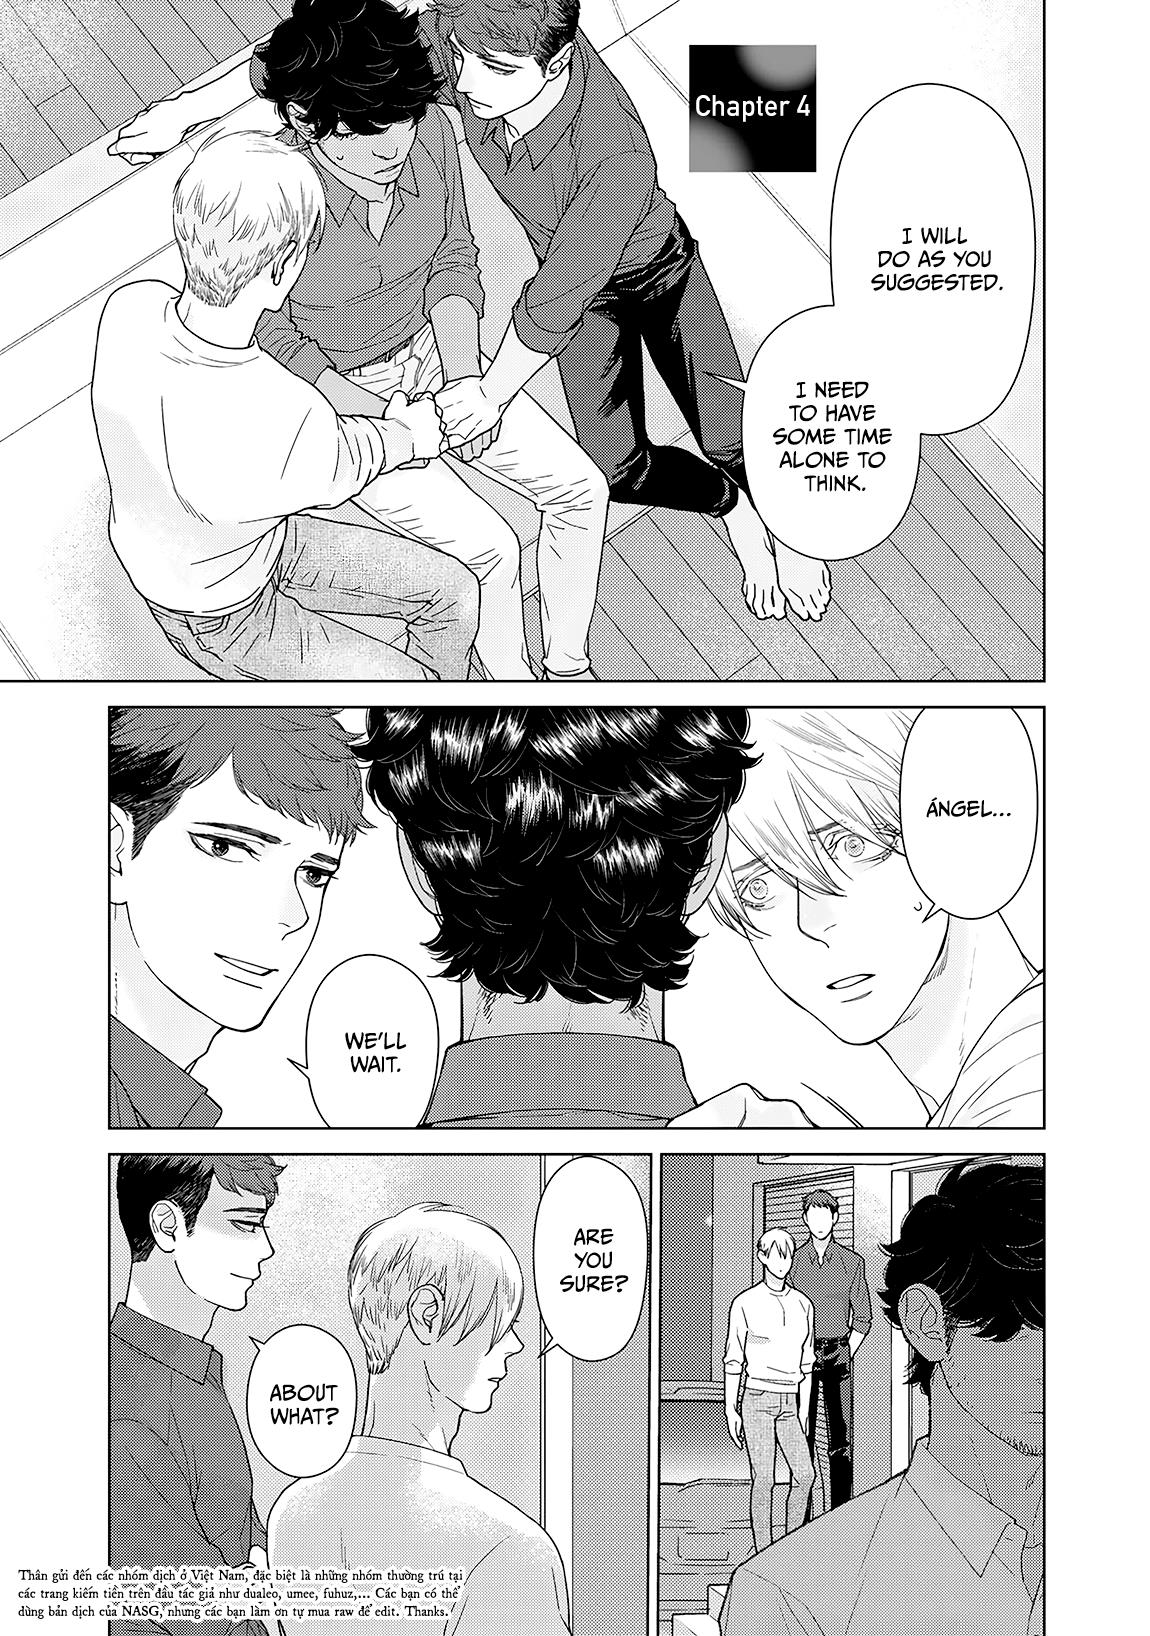 Who Will You Kiss? Vol.1 Chapter 4 - Picture 3